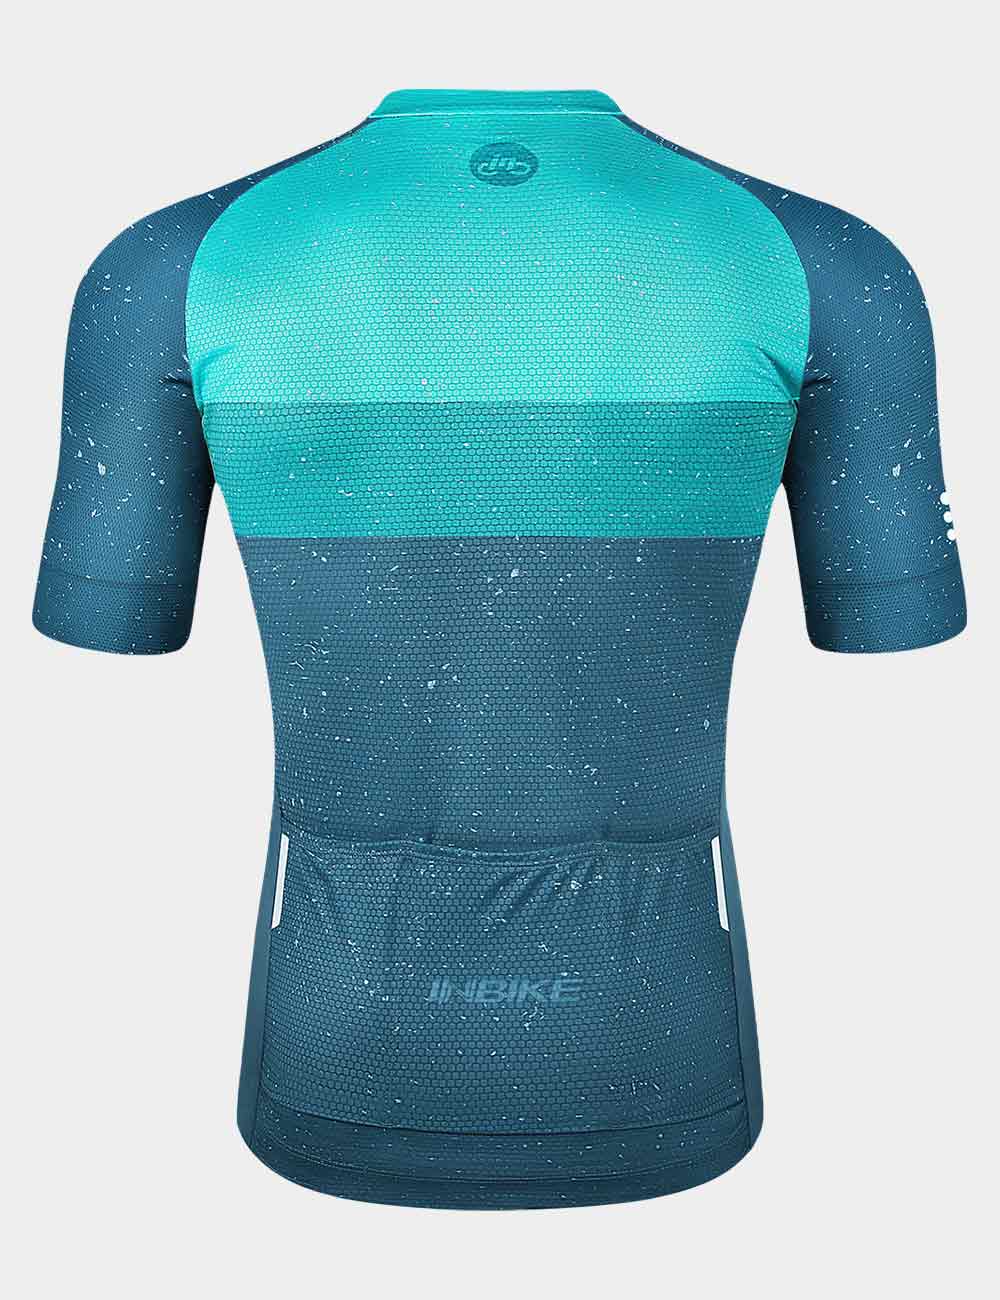 INBIKE Men Short Sleeve Cycling Jersey Sports Jersey Durable Stretchy